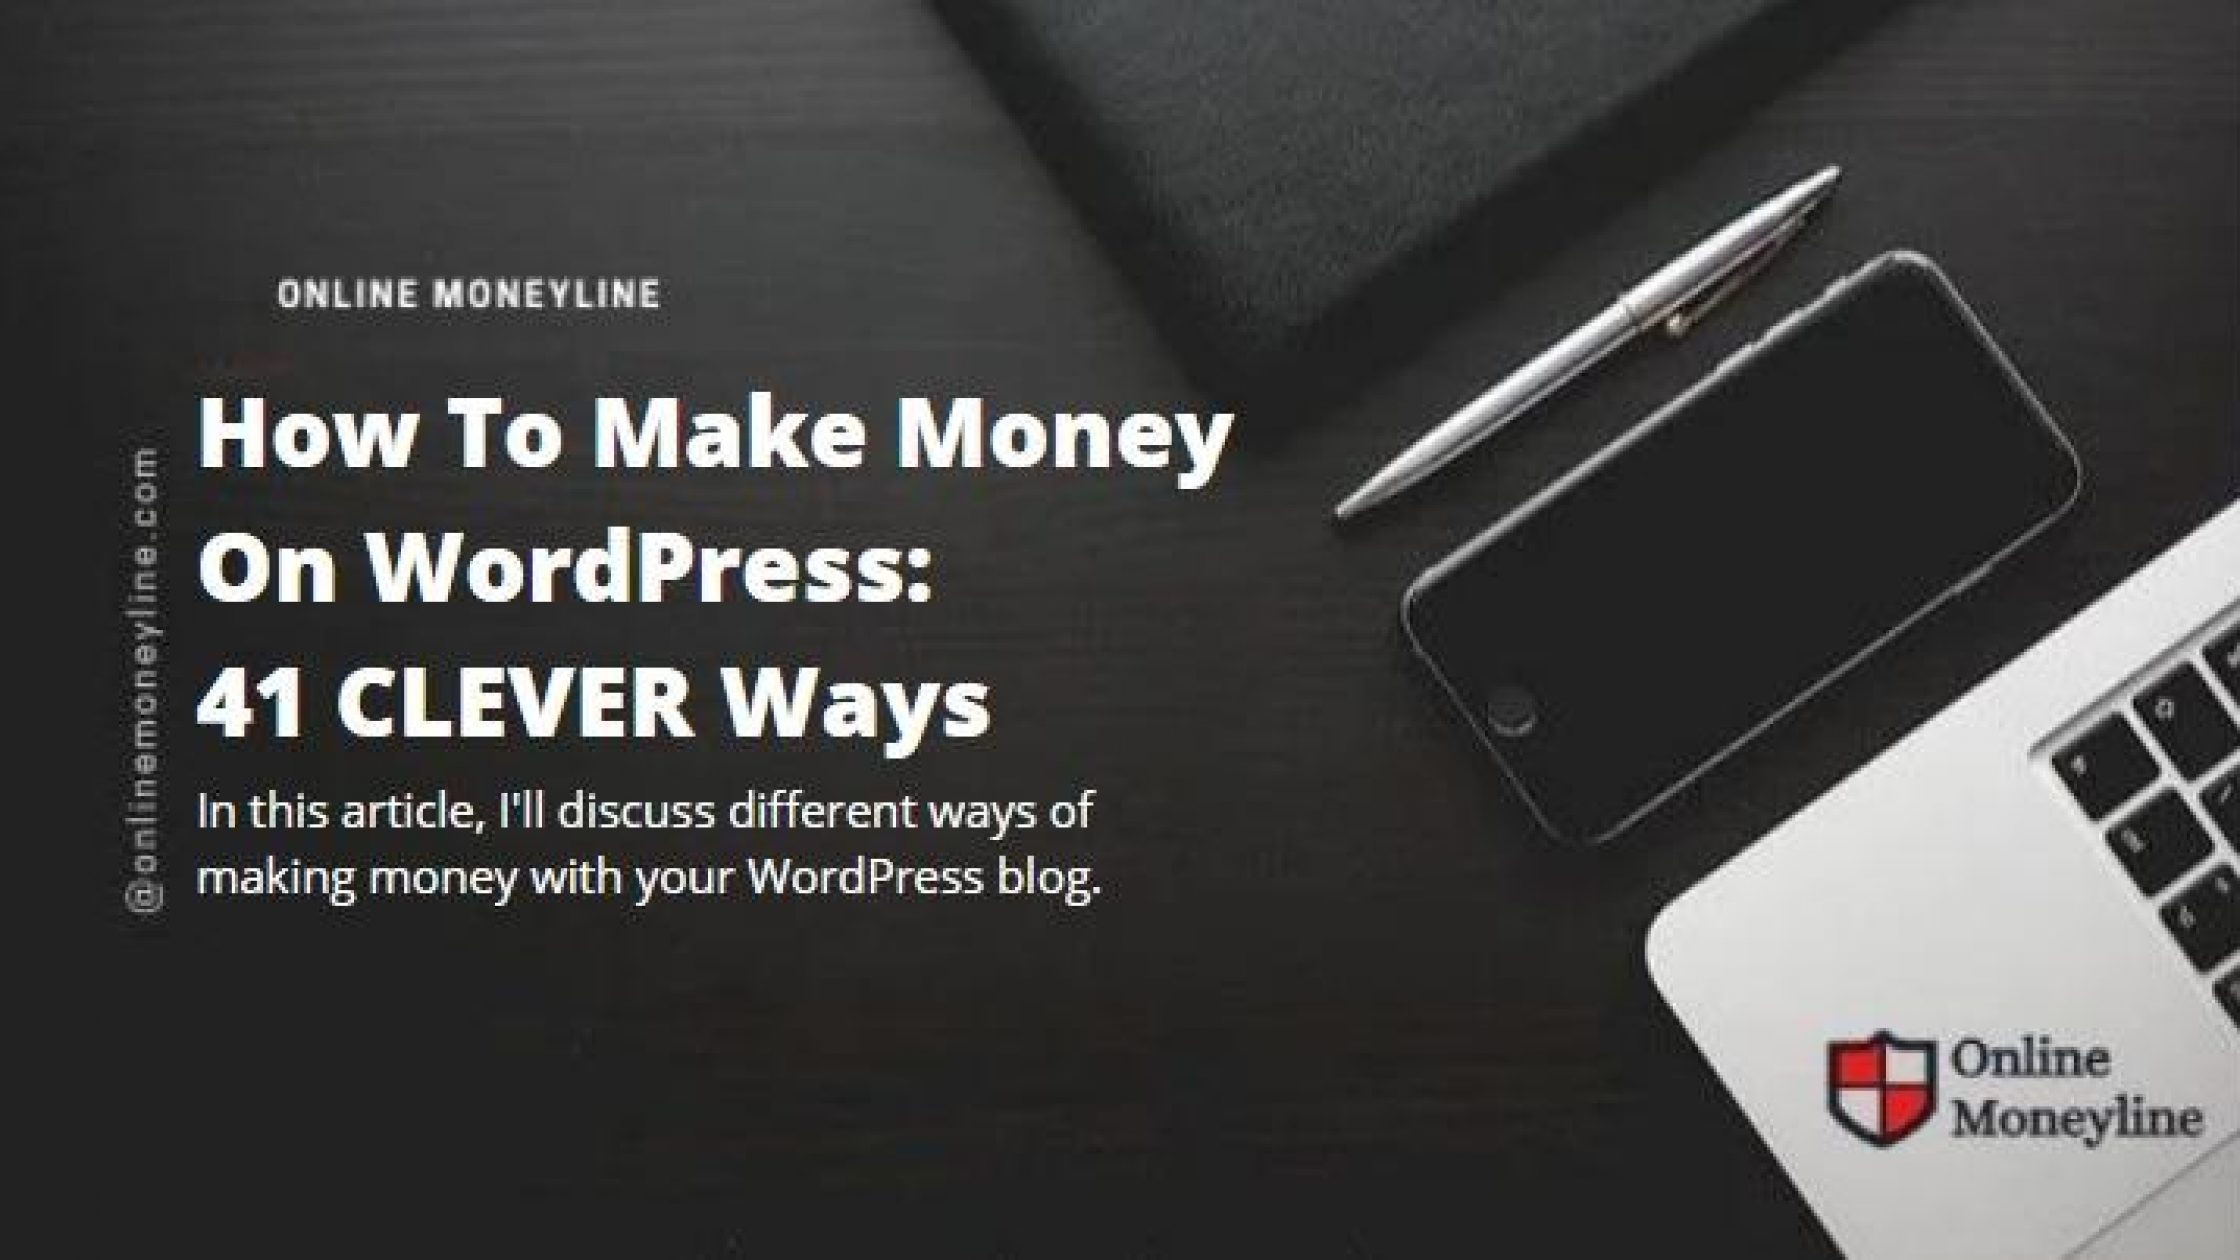 How To Make Money On WordPress: 41 CLEVER Ways